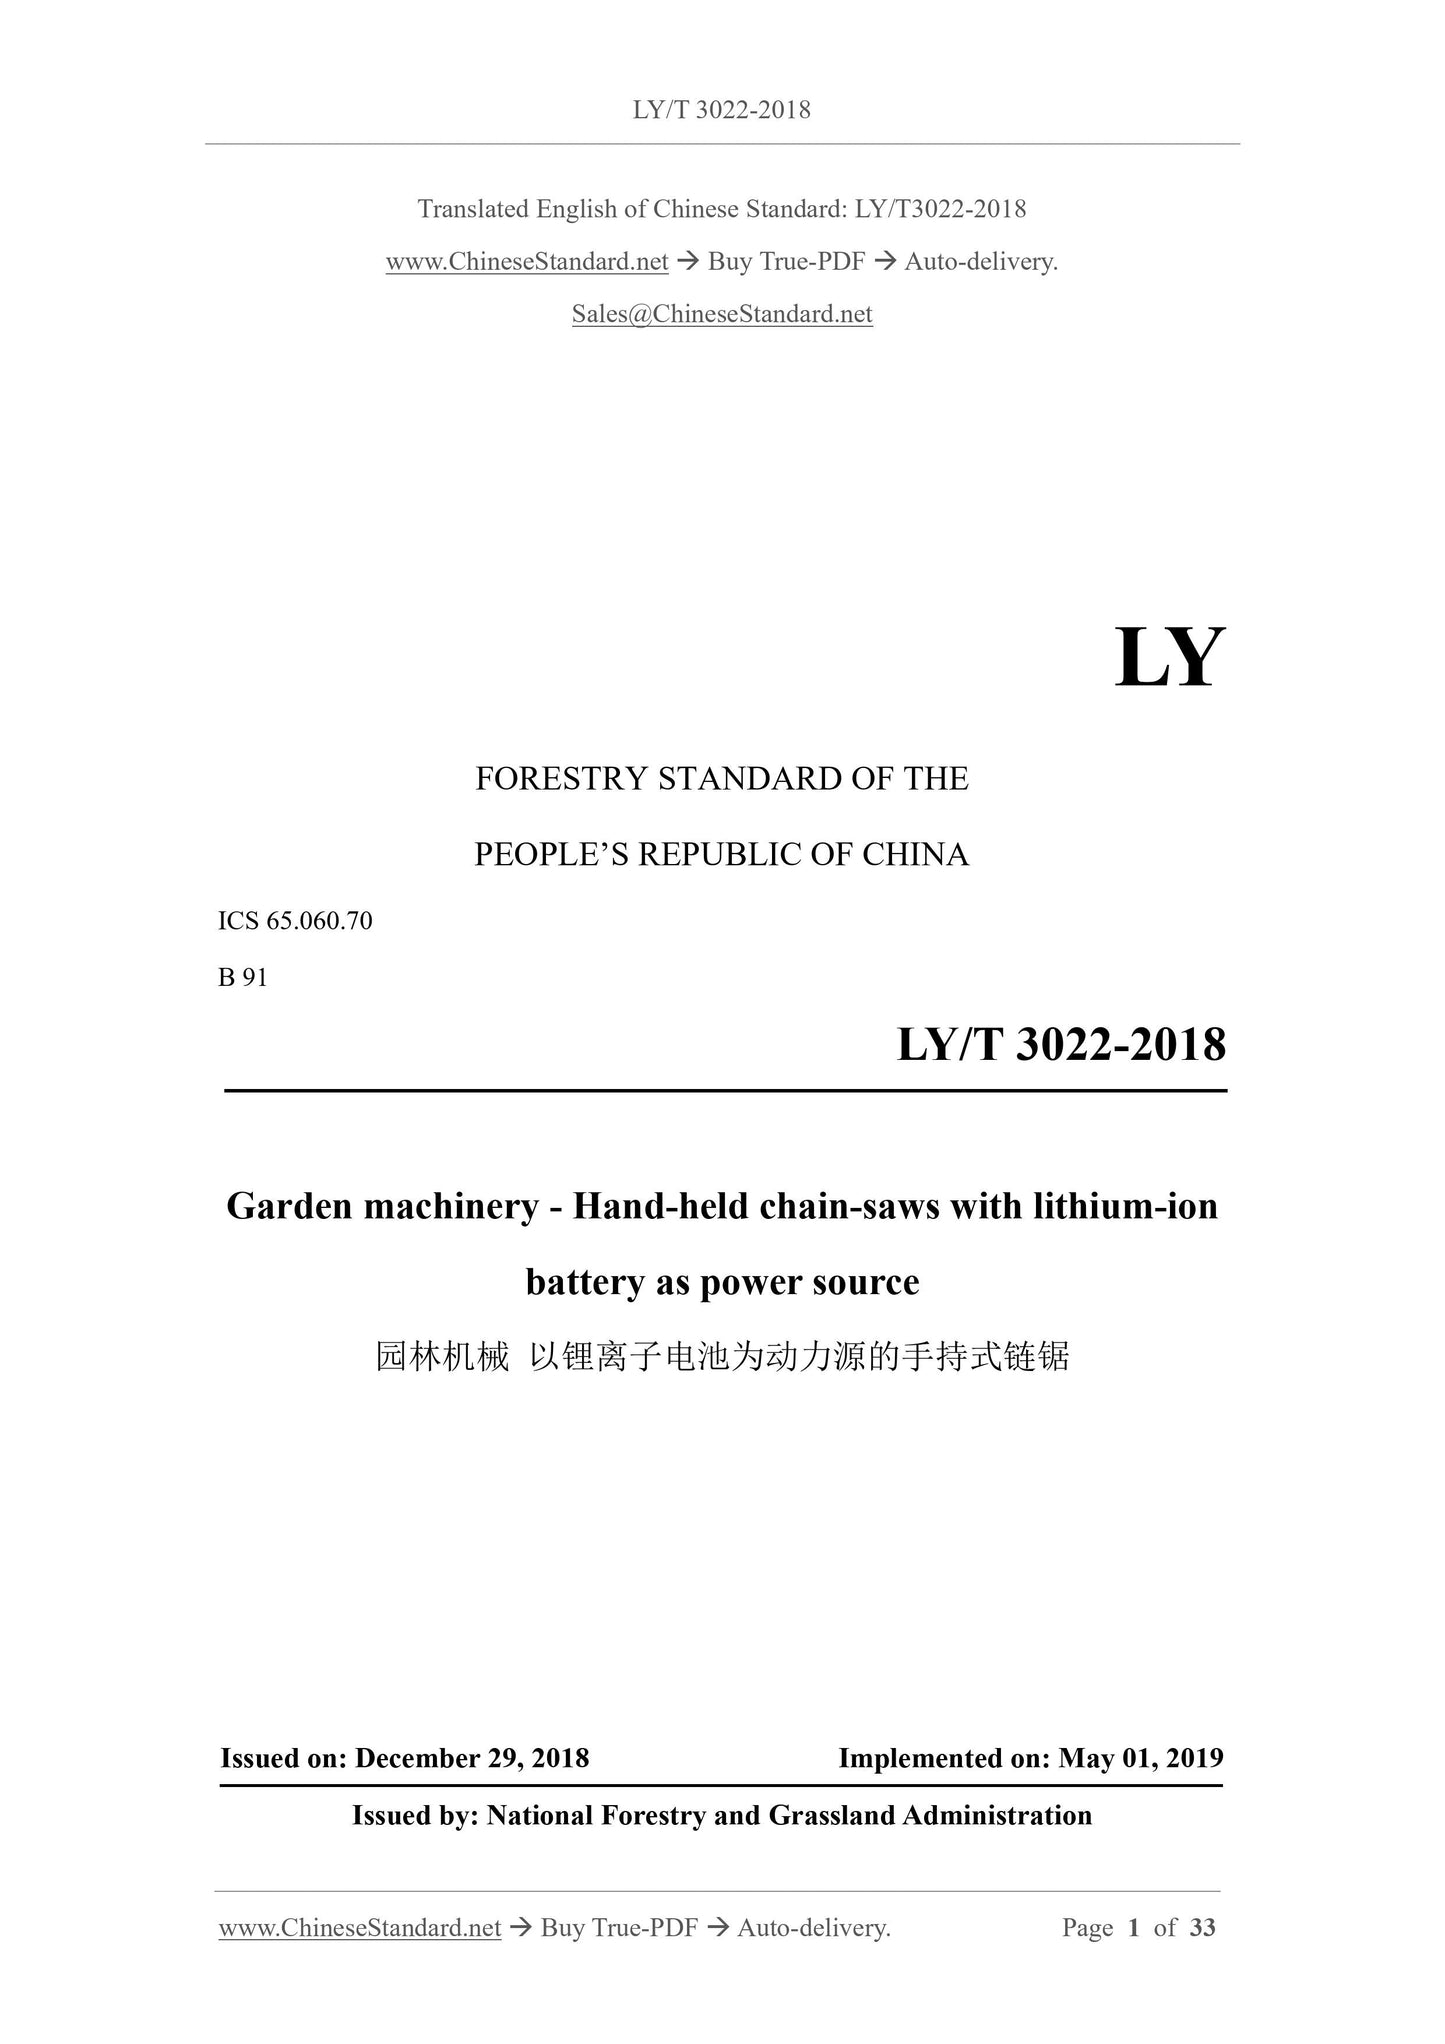 LY/T 3022-2018 Page 1